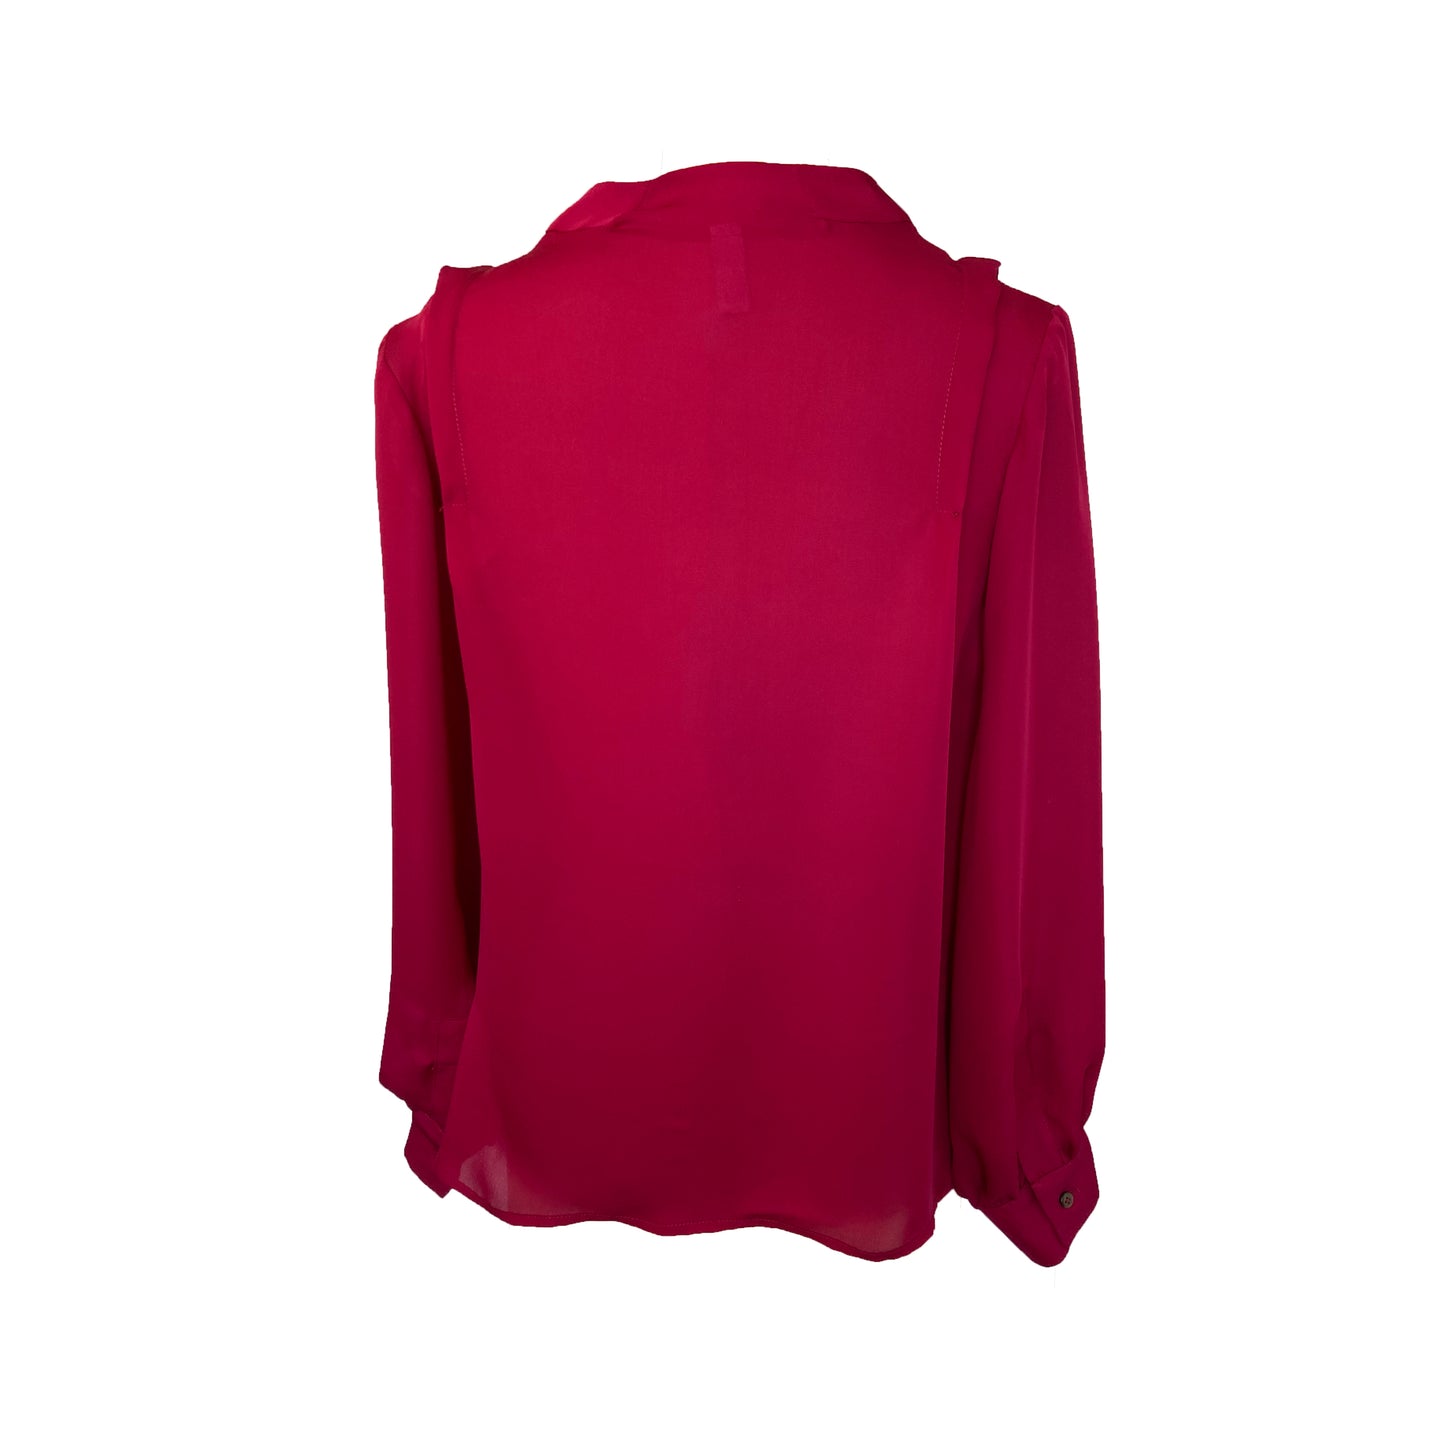 Back of silk blouse in cherry red